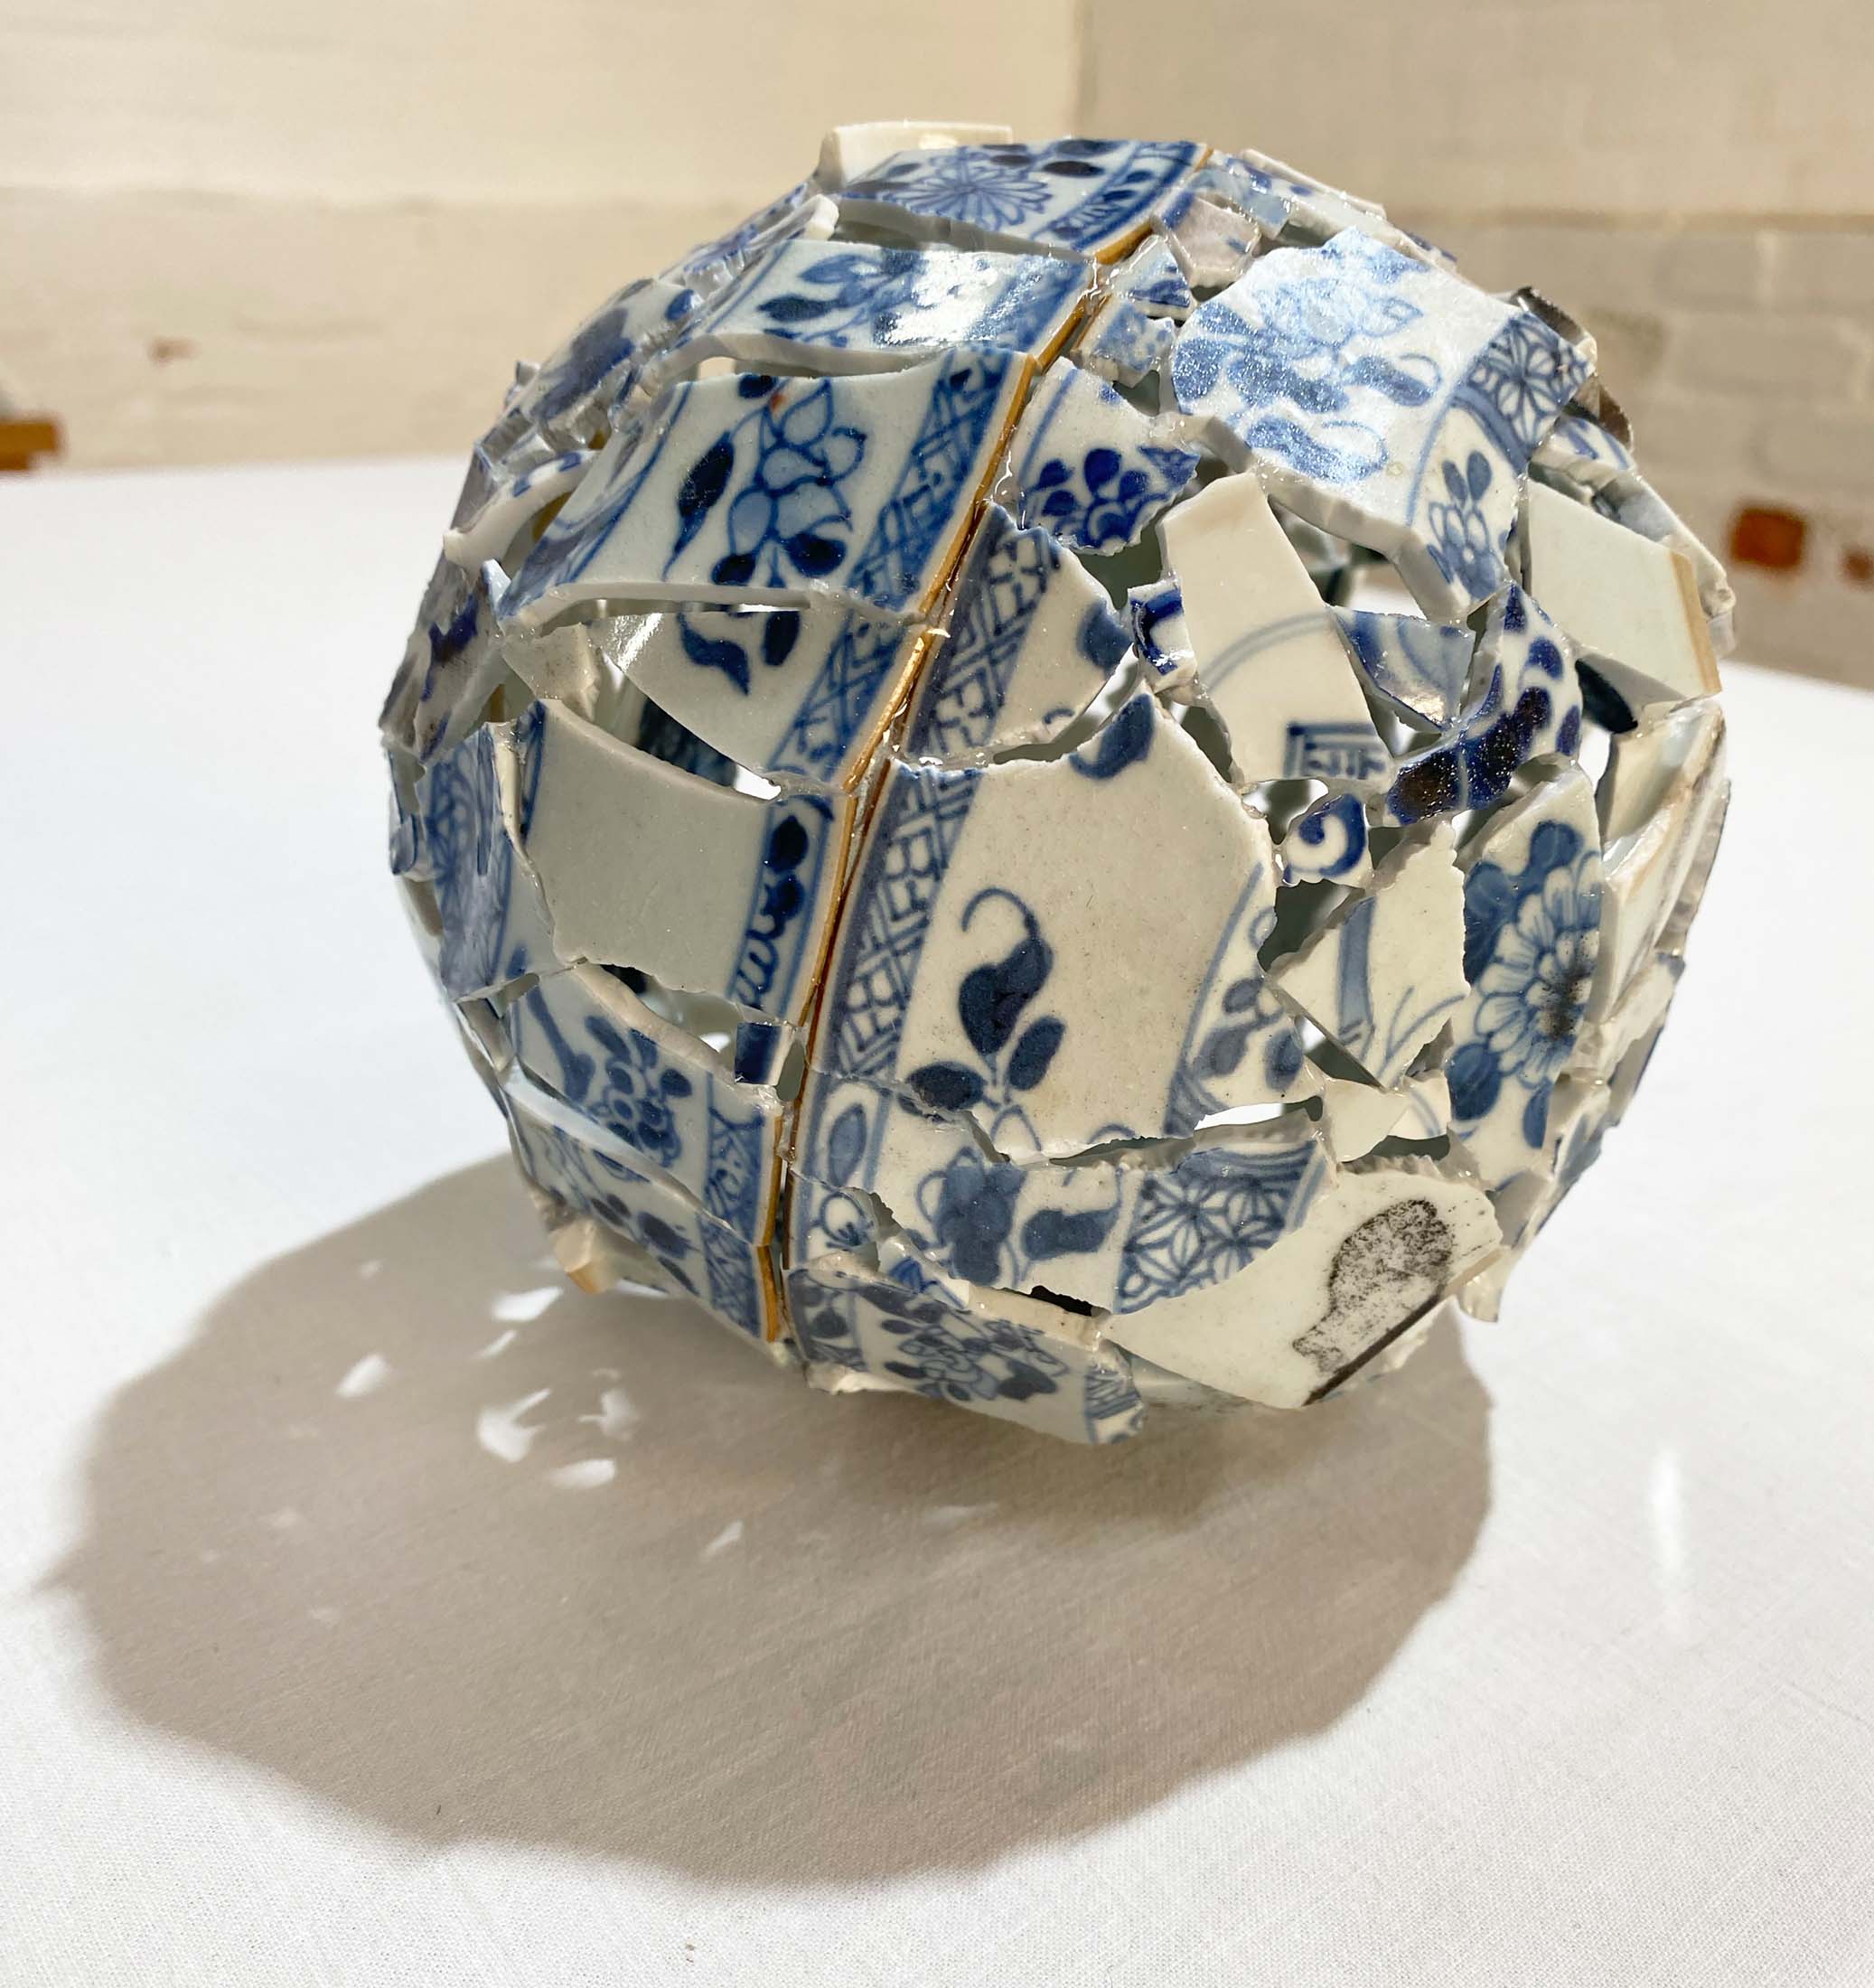 A piece from Tamlin Blake's art show, 'Shard Bubble 2', featuring an intricate mosaic of china plate pieces, symbolizing the theme of art and resilience at the 'After the Fire' exhibition, Sisonke Gallery.